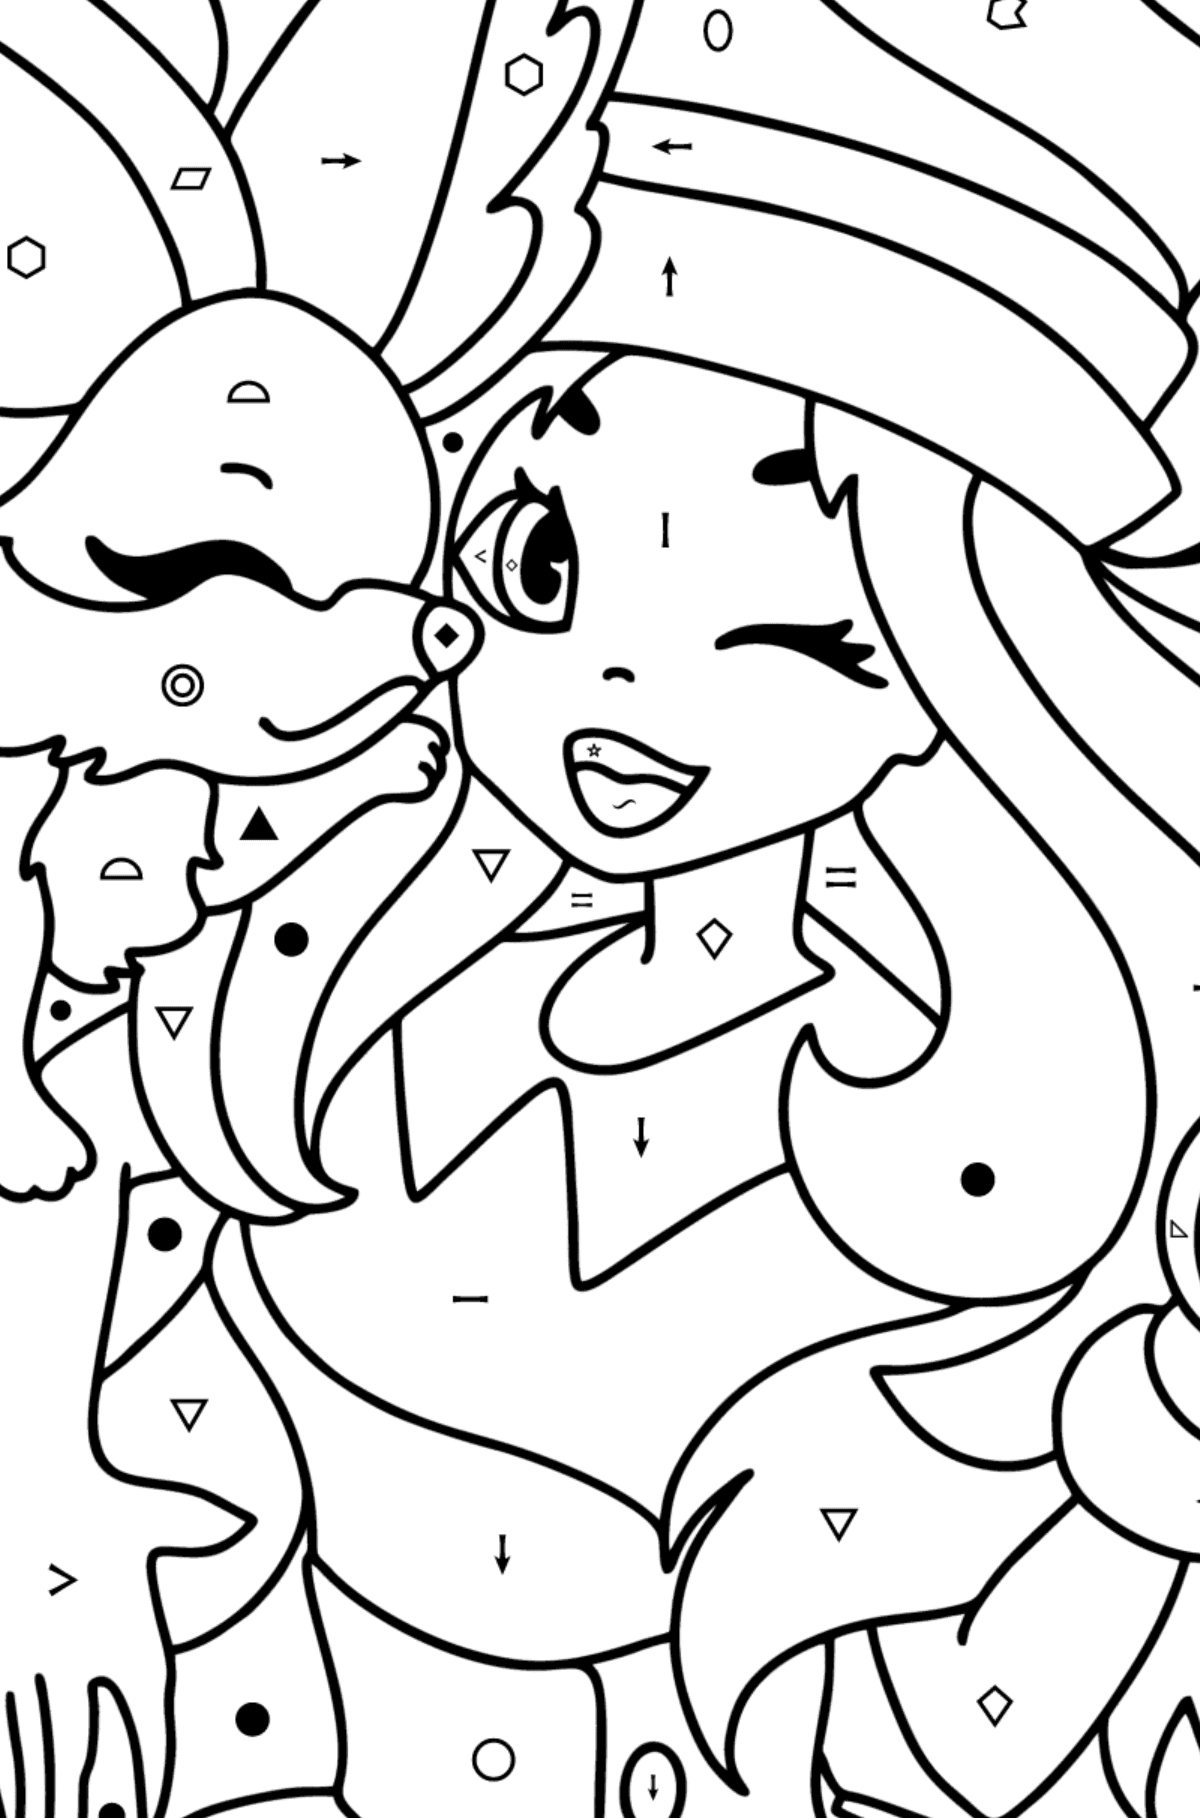 Colouring page Pokémon X and Y Serena - Coloring by Symbols and Geometric Shapes for Kids